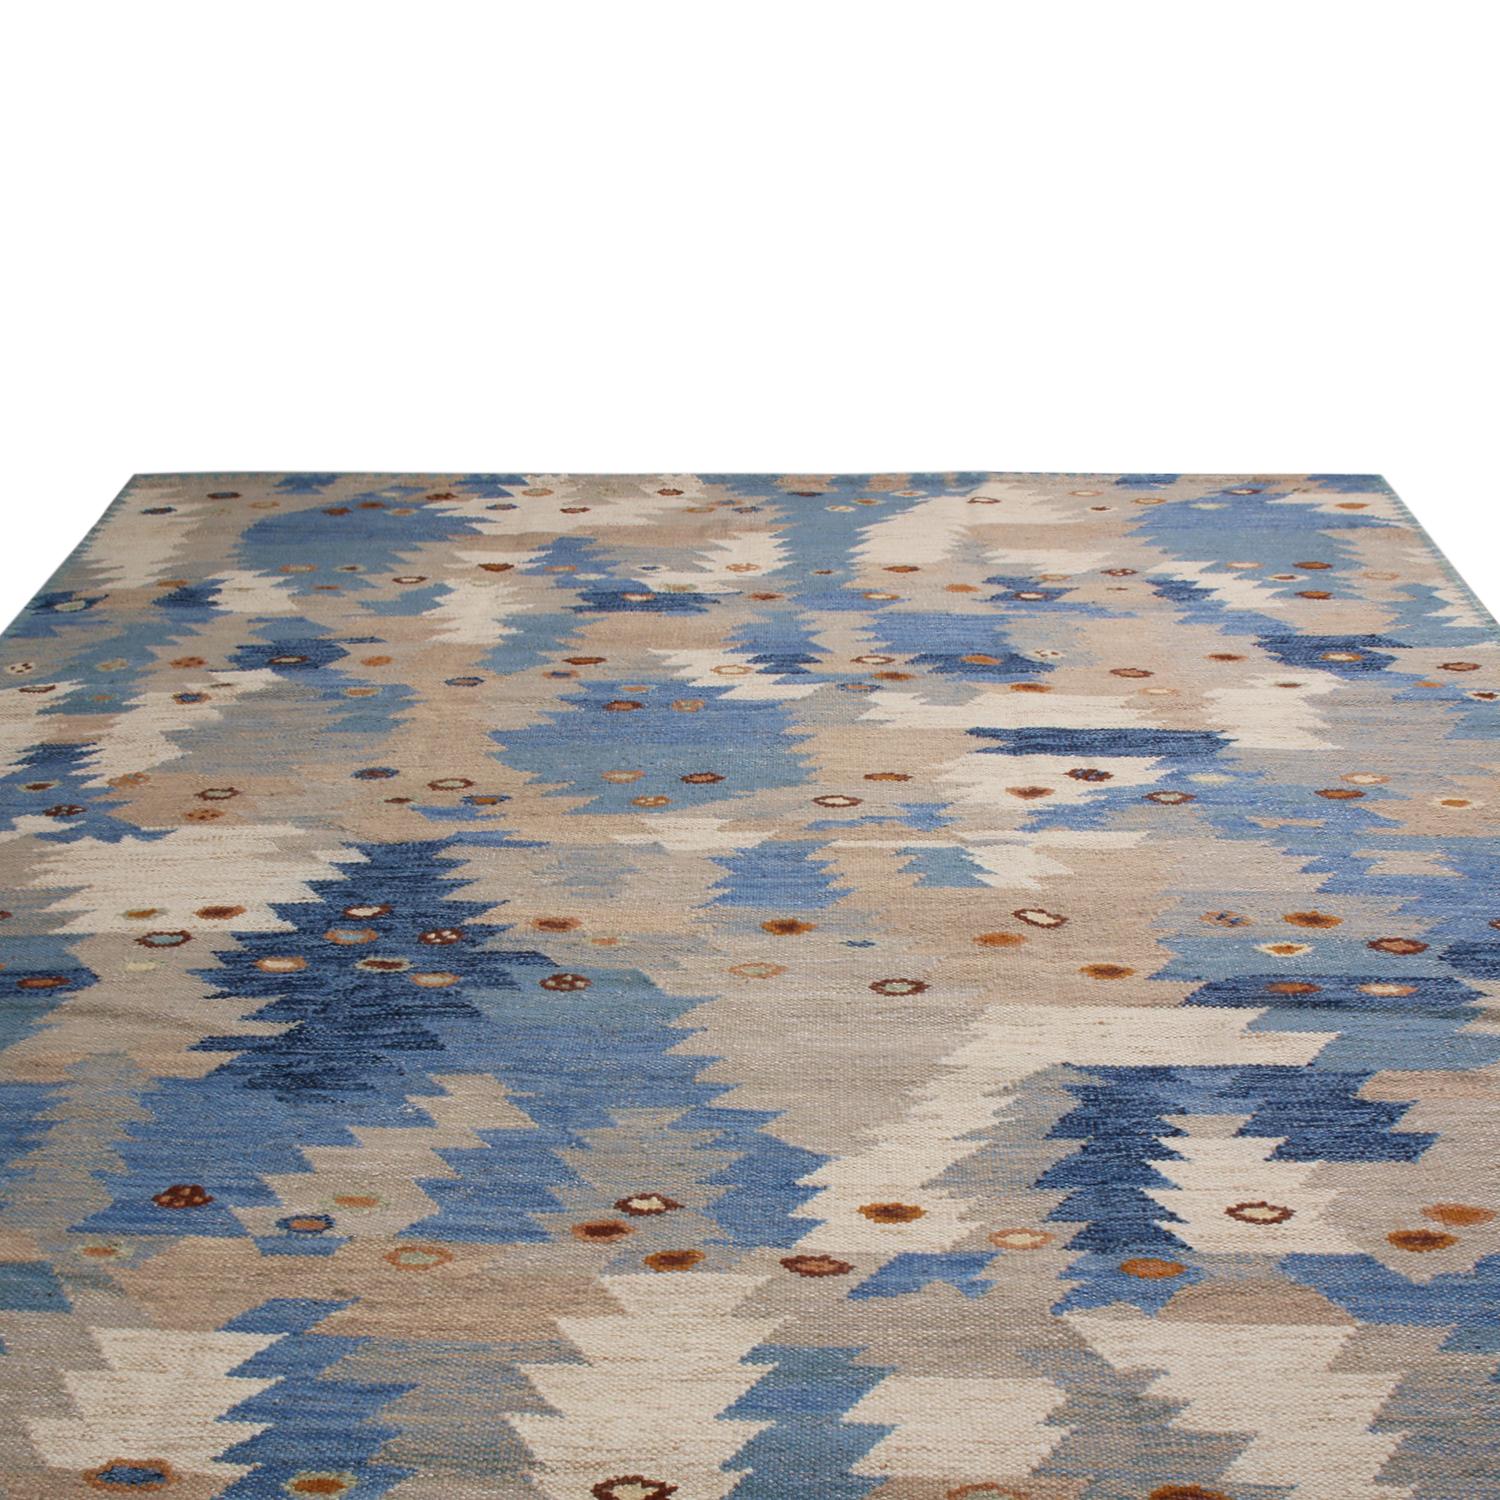 Originating from India, this hand knotted pile rug hails from Rug & Kilim’s Scandinavian-inspired collection, featuring a distinct tribal geometric all-over field design in multi-tonal blue colorways with luminous brown accents; highlighted by